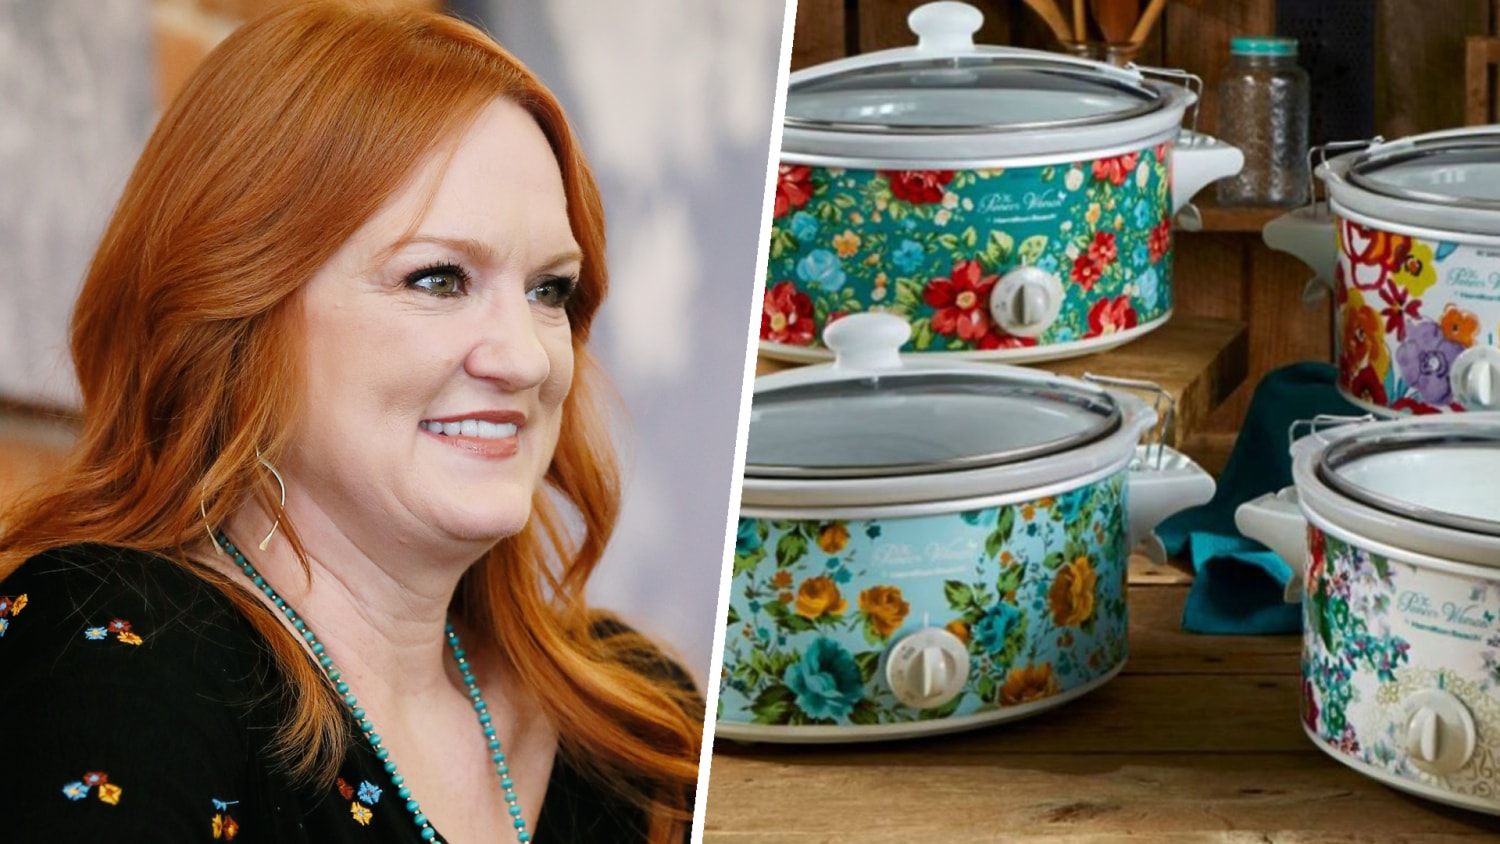 The Pioneer Woman Just Launched the Prettiest Slow Cookers We've Ever Seen